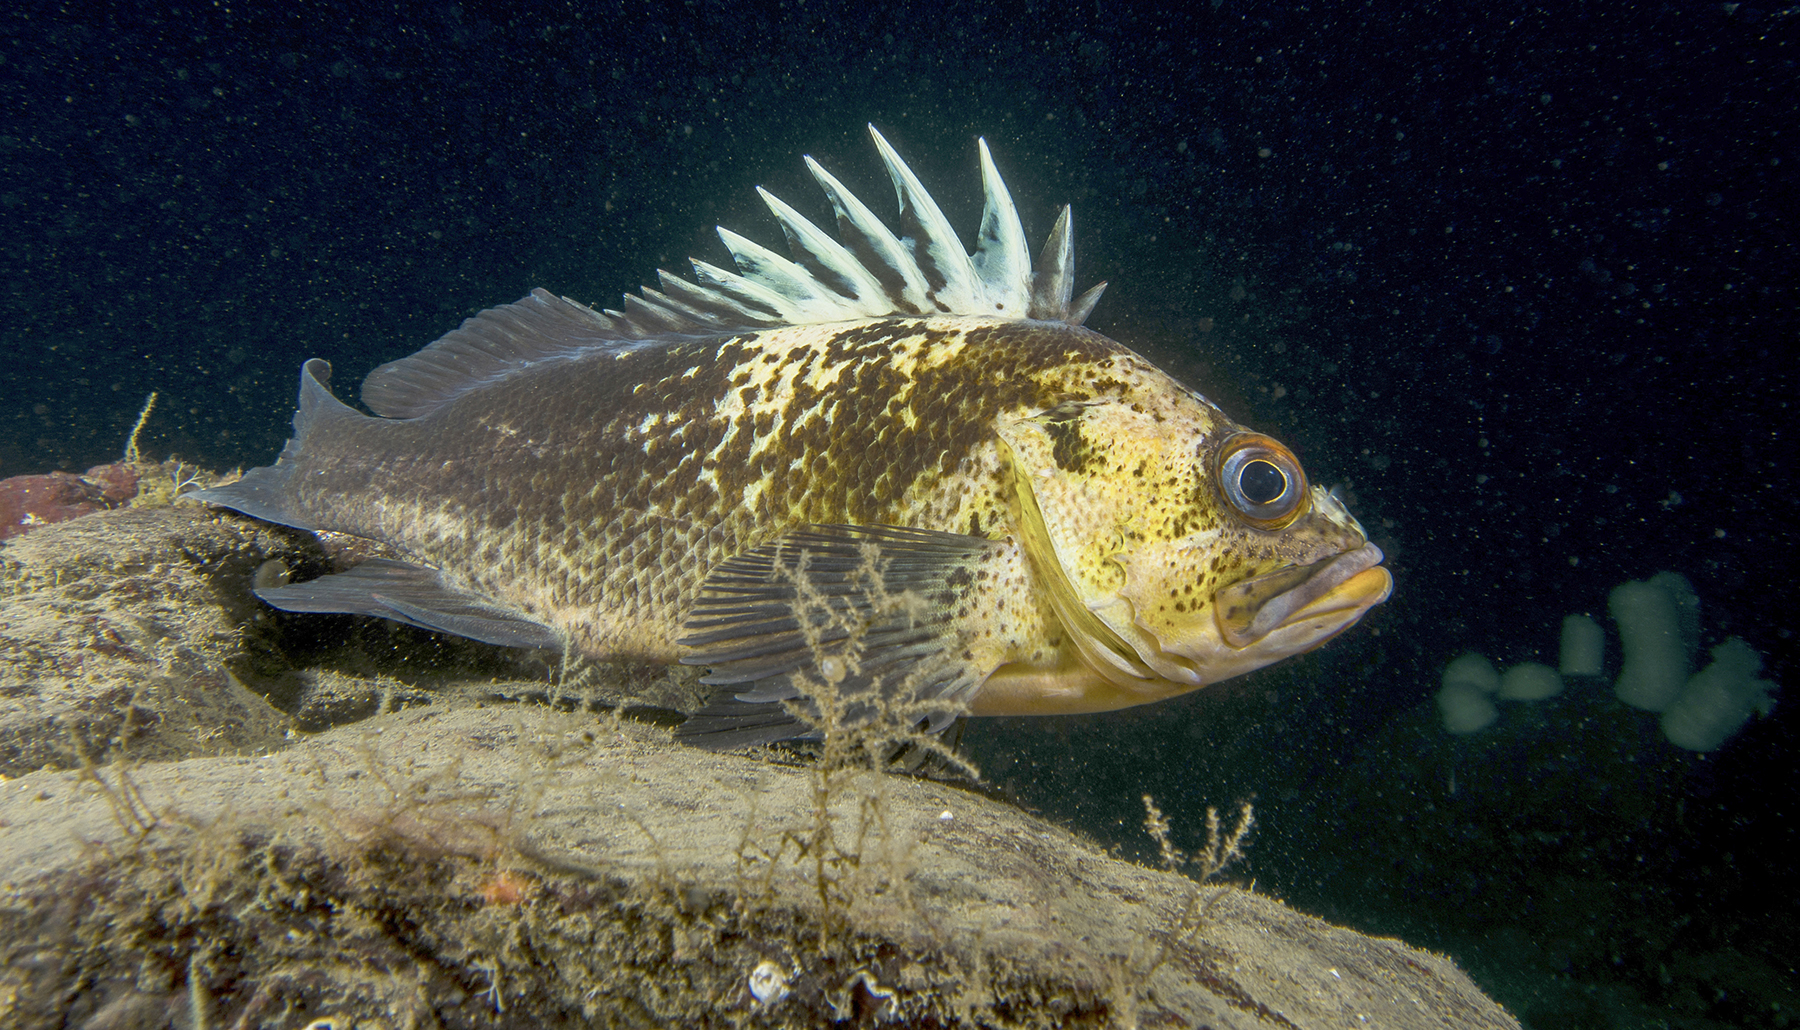 The Quillback Rockfish: This spiky creature could end up on your